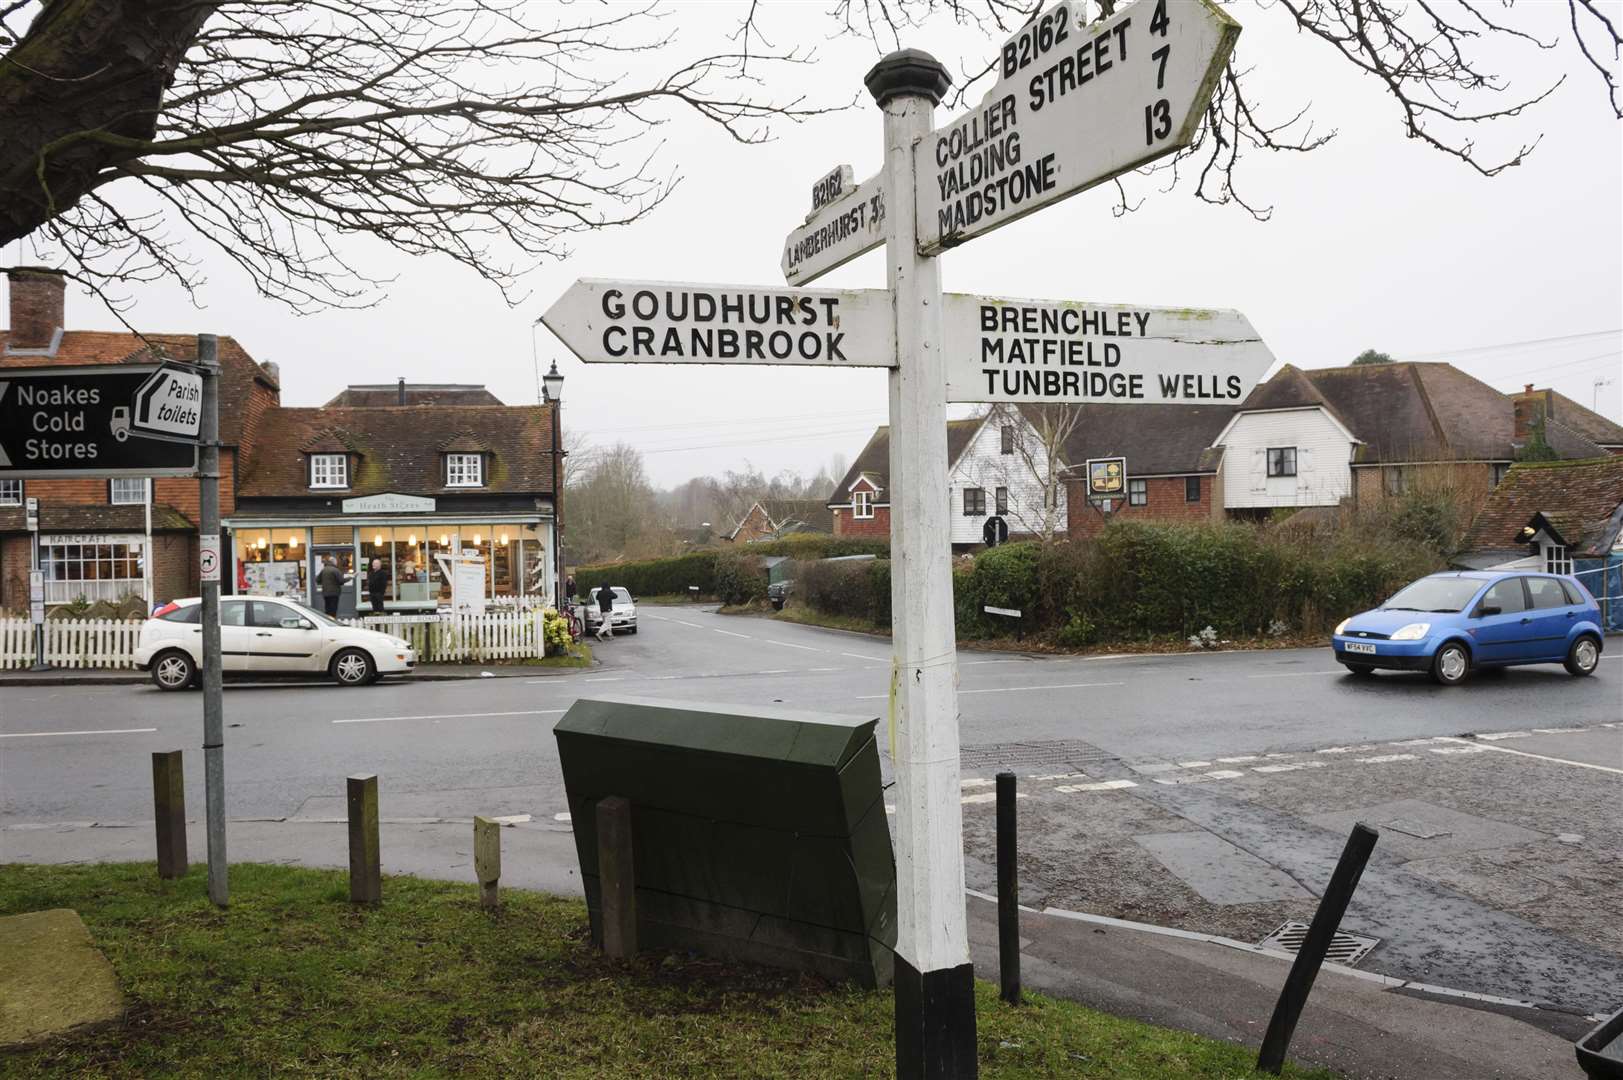 Shop owner Kate Mills is concerned at the number of accidents occurring at the crossroads with Lamberhurst Road